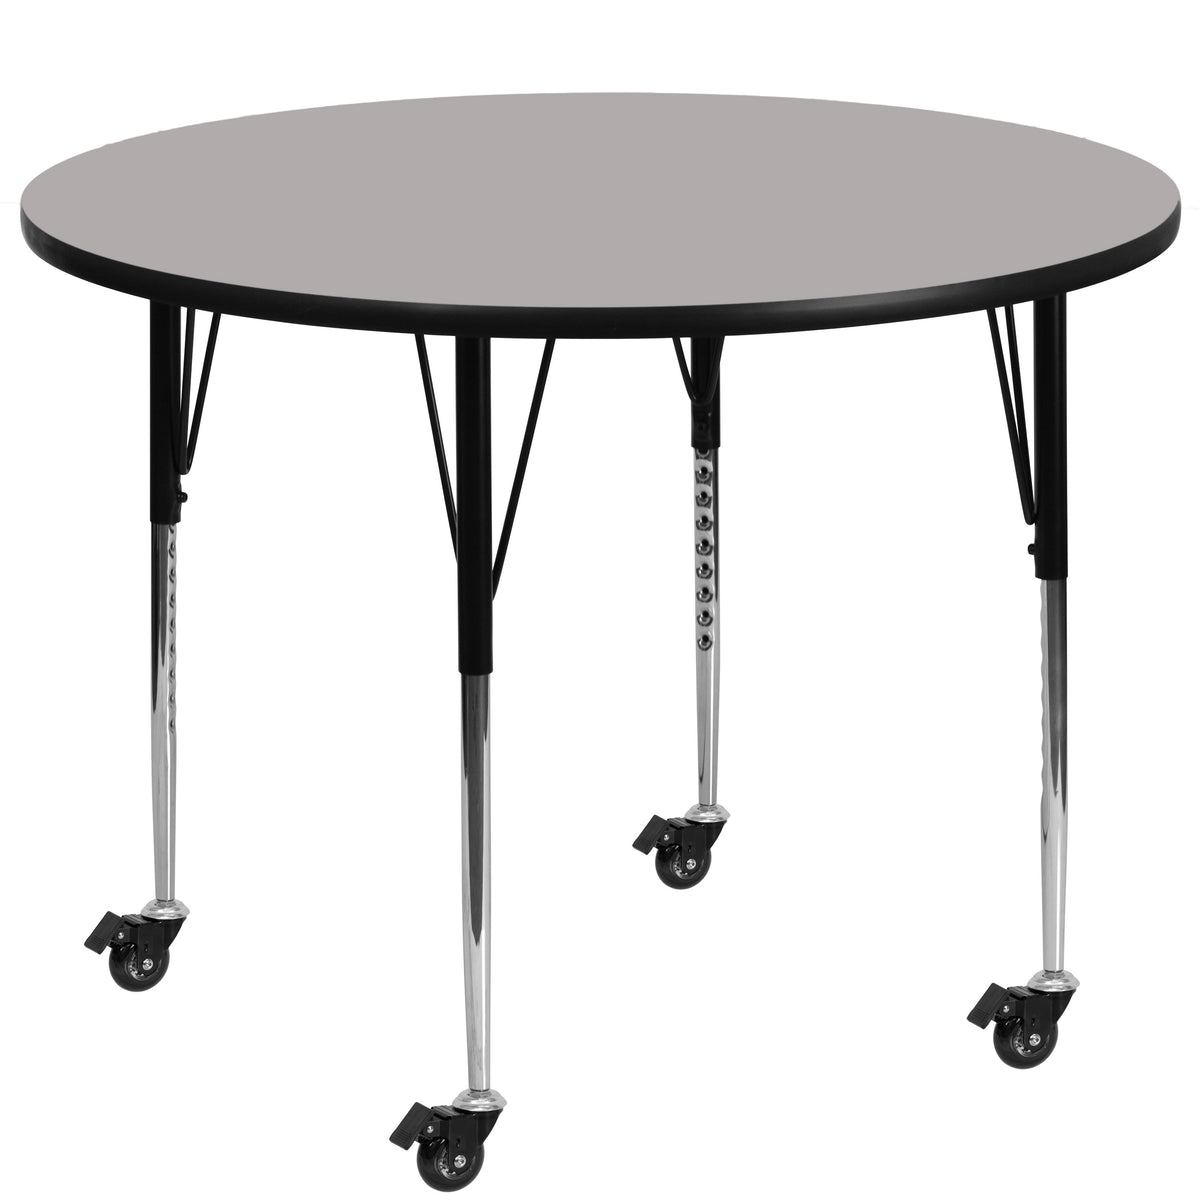 Gray |#| Mobile 48inch RD Grey HP Laminate Activity Table - Standard Height Adjustable Legs